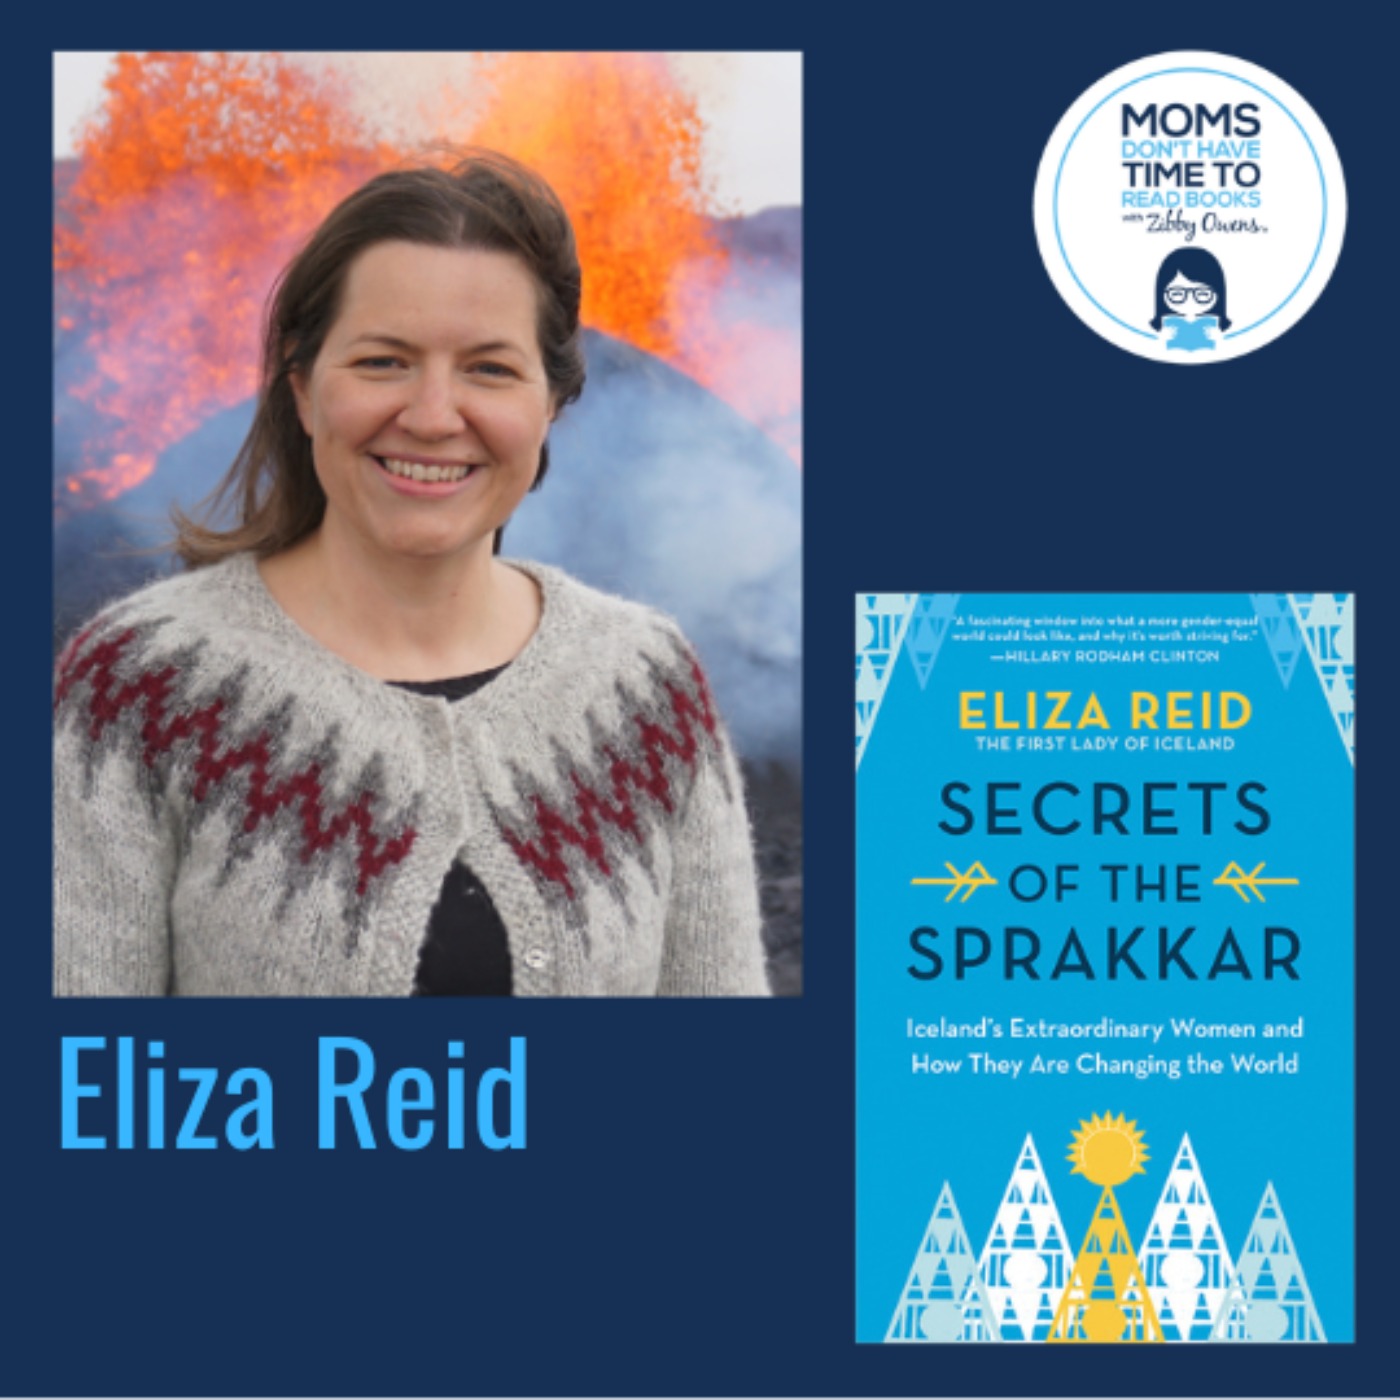 Eliza Reid, SECRETS OF THE SPRAKKAR: Iceland's Extraordinary Women and How They Are Changing the World